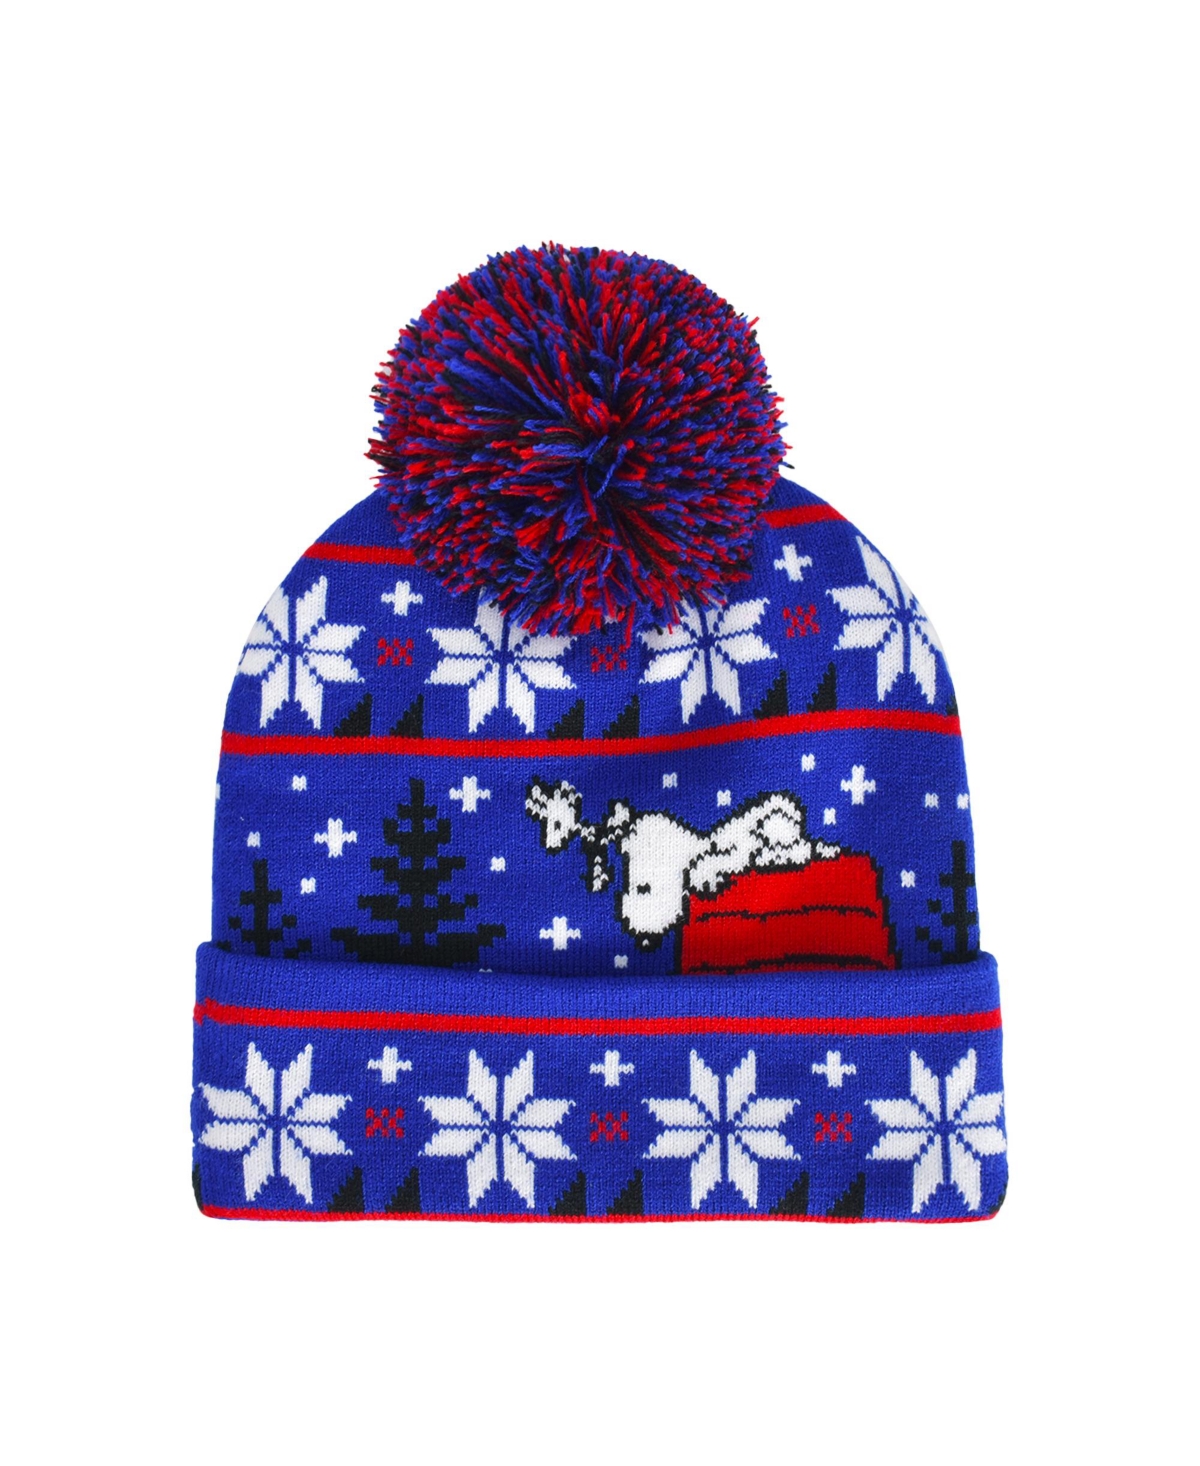 Blue Beanie Red House With Snoopy - Blue